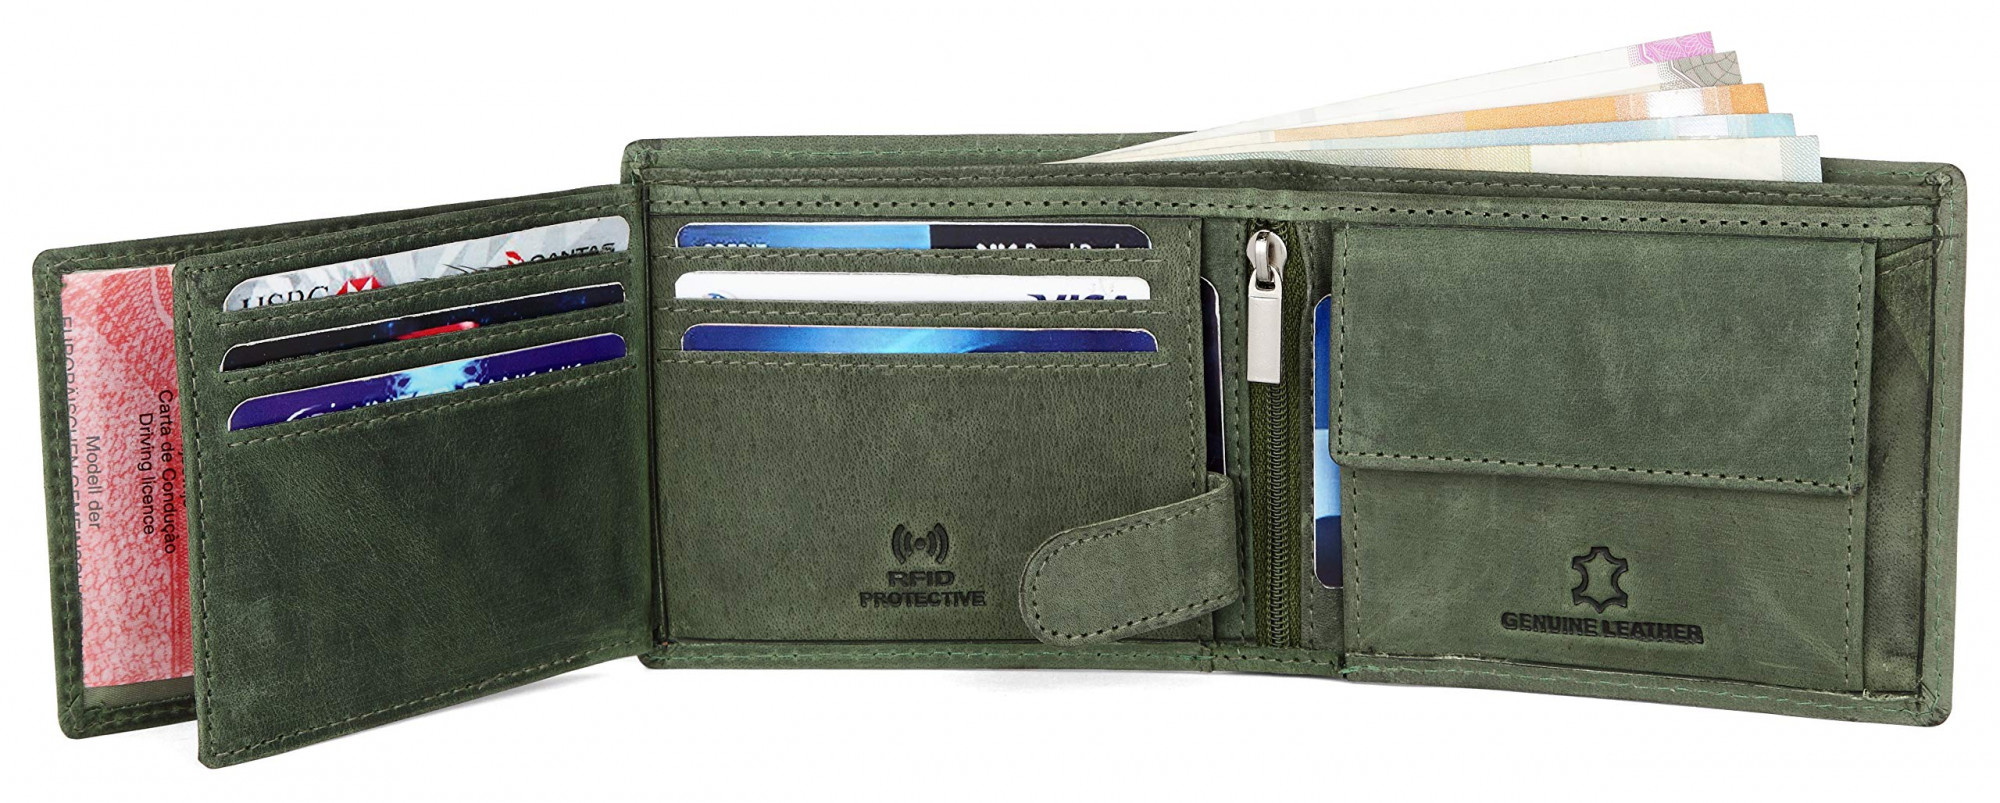 WildHorn Green Leather Wallet for Men I 9 Card Slots I 2 Currency & Secret Compartments I 1 Zipper & 3 ID Card Slots